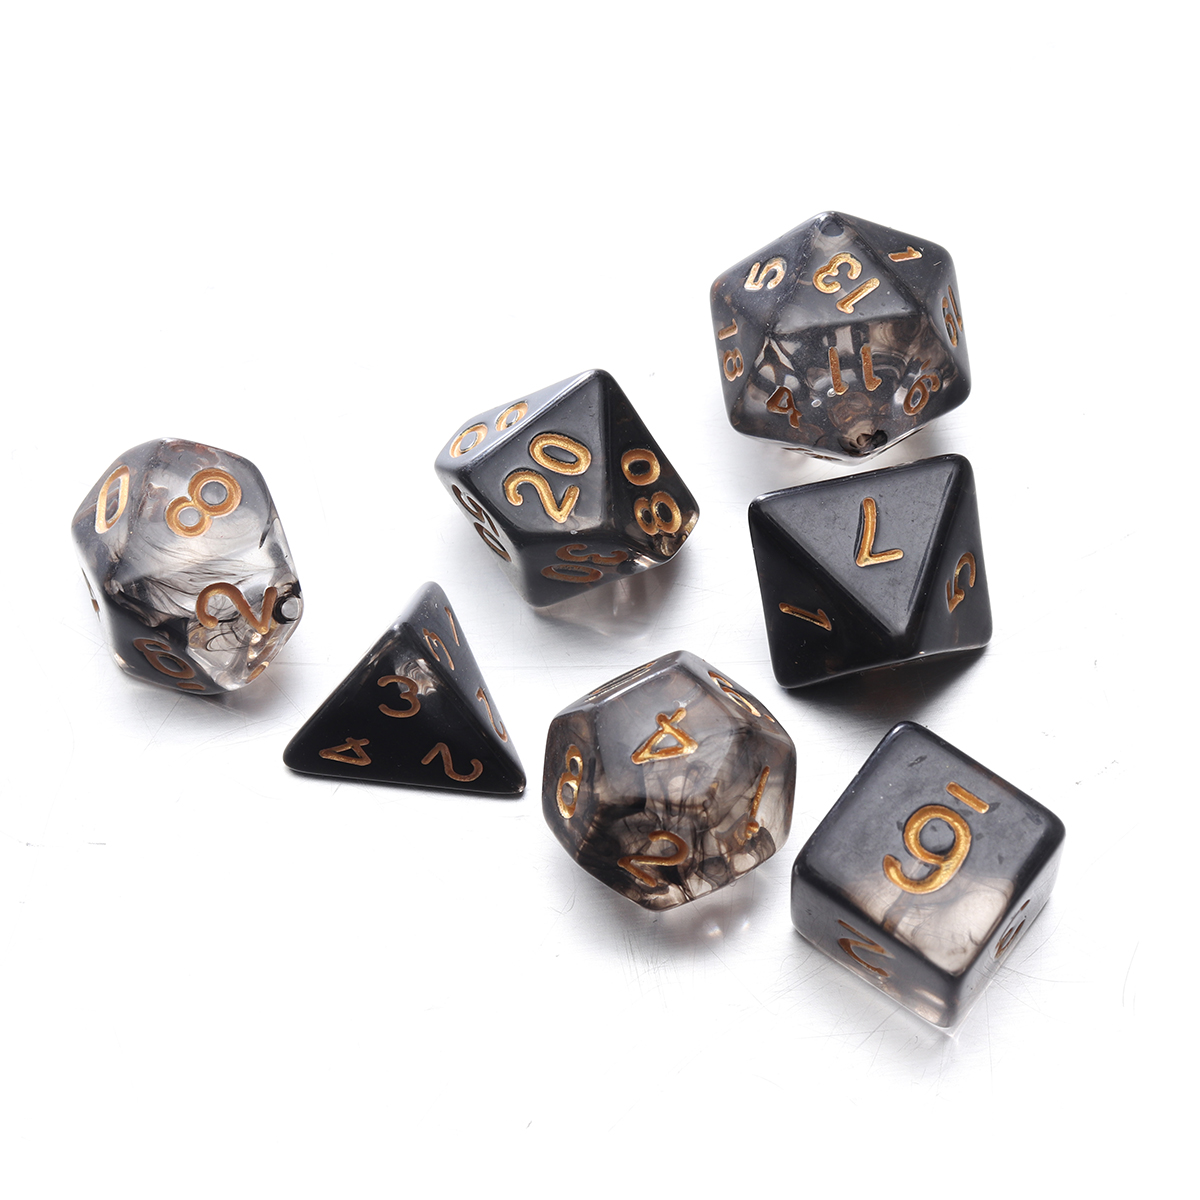 7pcs-Set-Embossed-Polyhedral-Dices-DND-RPG-MTG-Role-Playing-Board-Game-Dices-Set-1627969-9